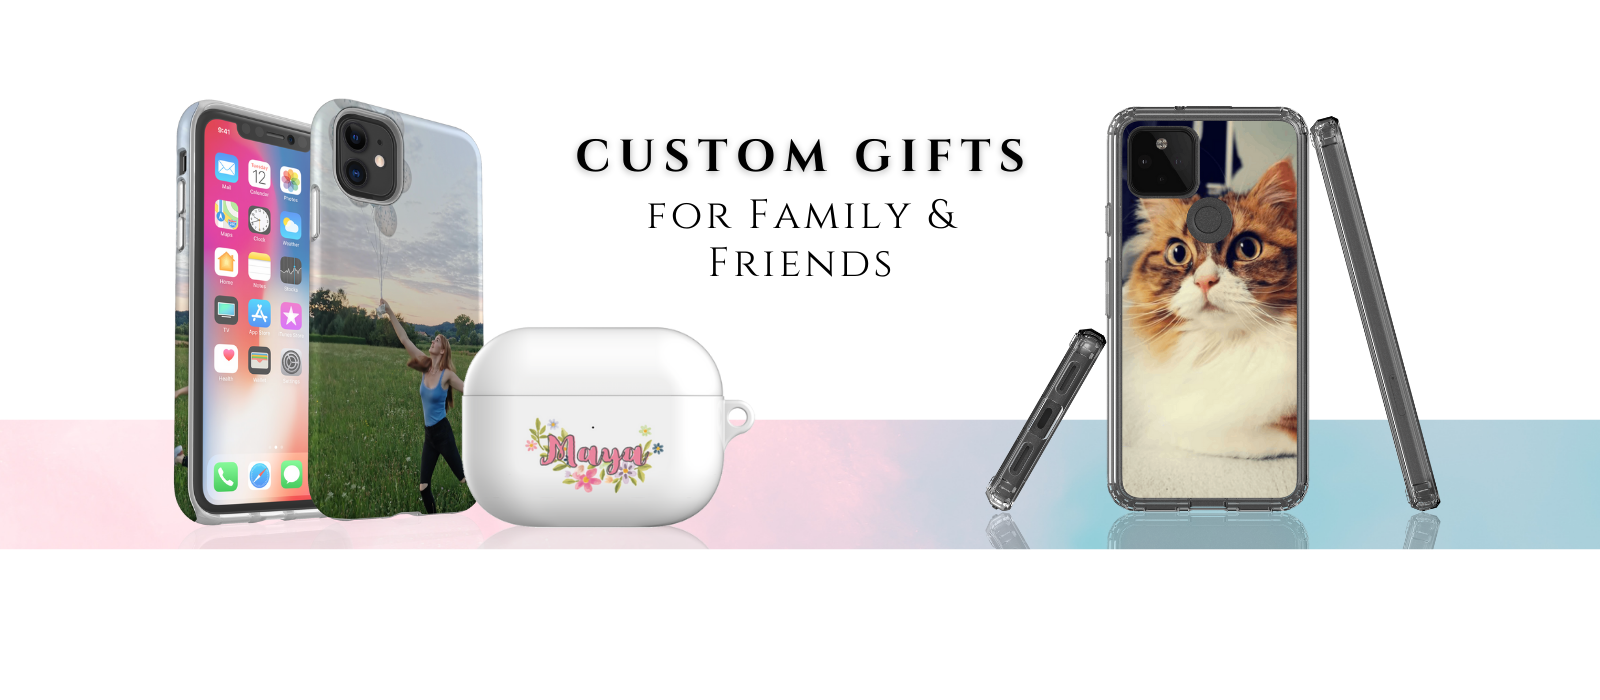 Custom Mobile Accessories Make Great Gifts for Your Family or Friends - Here is Why